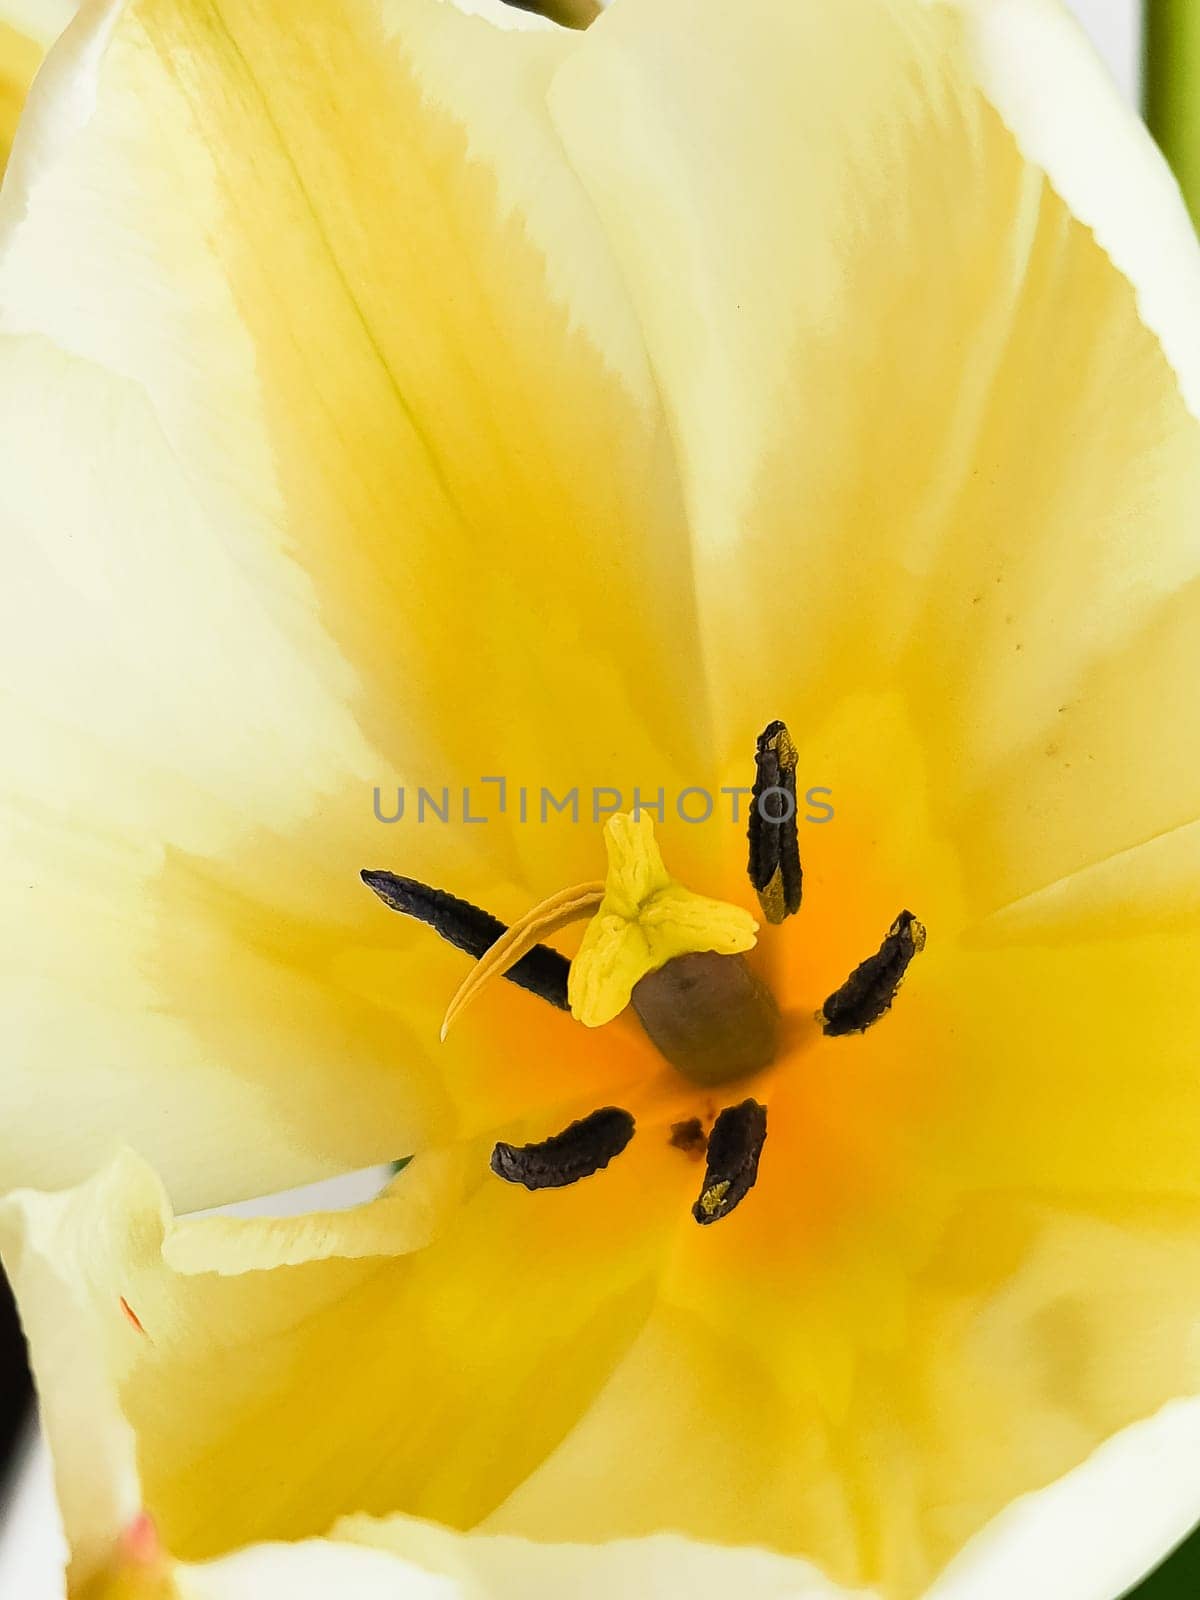 Inner part of white tulip flower bud, smooth delicate petals. Tulips heart with yellow pistil, stamens vertical macro photo.